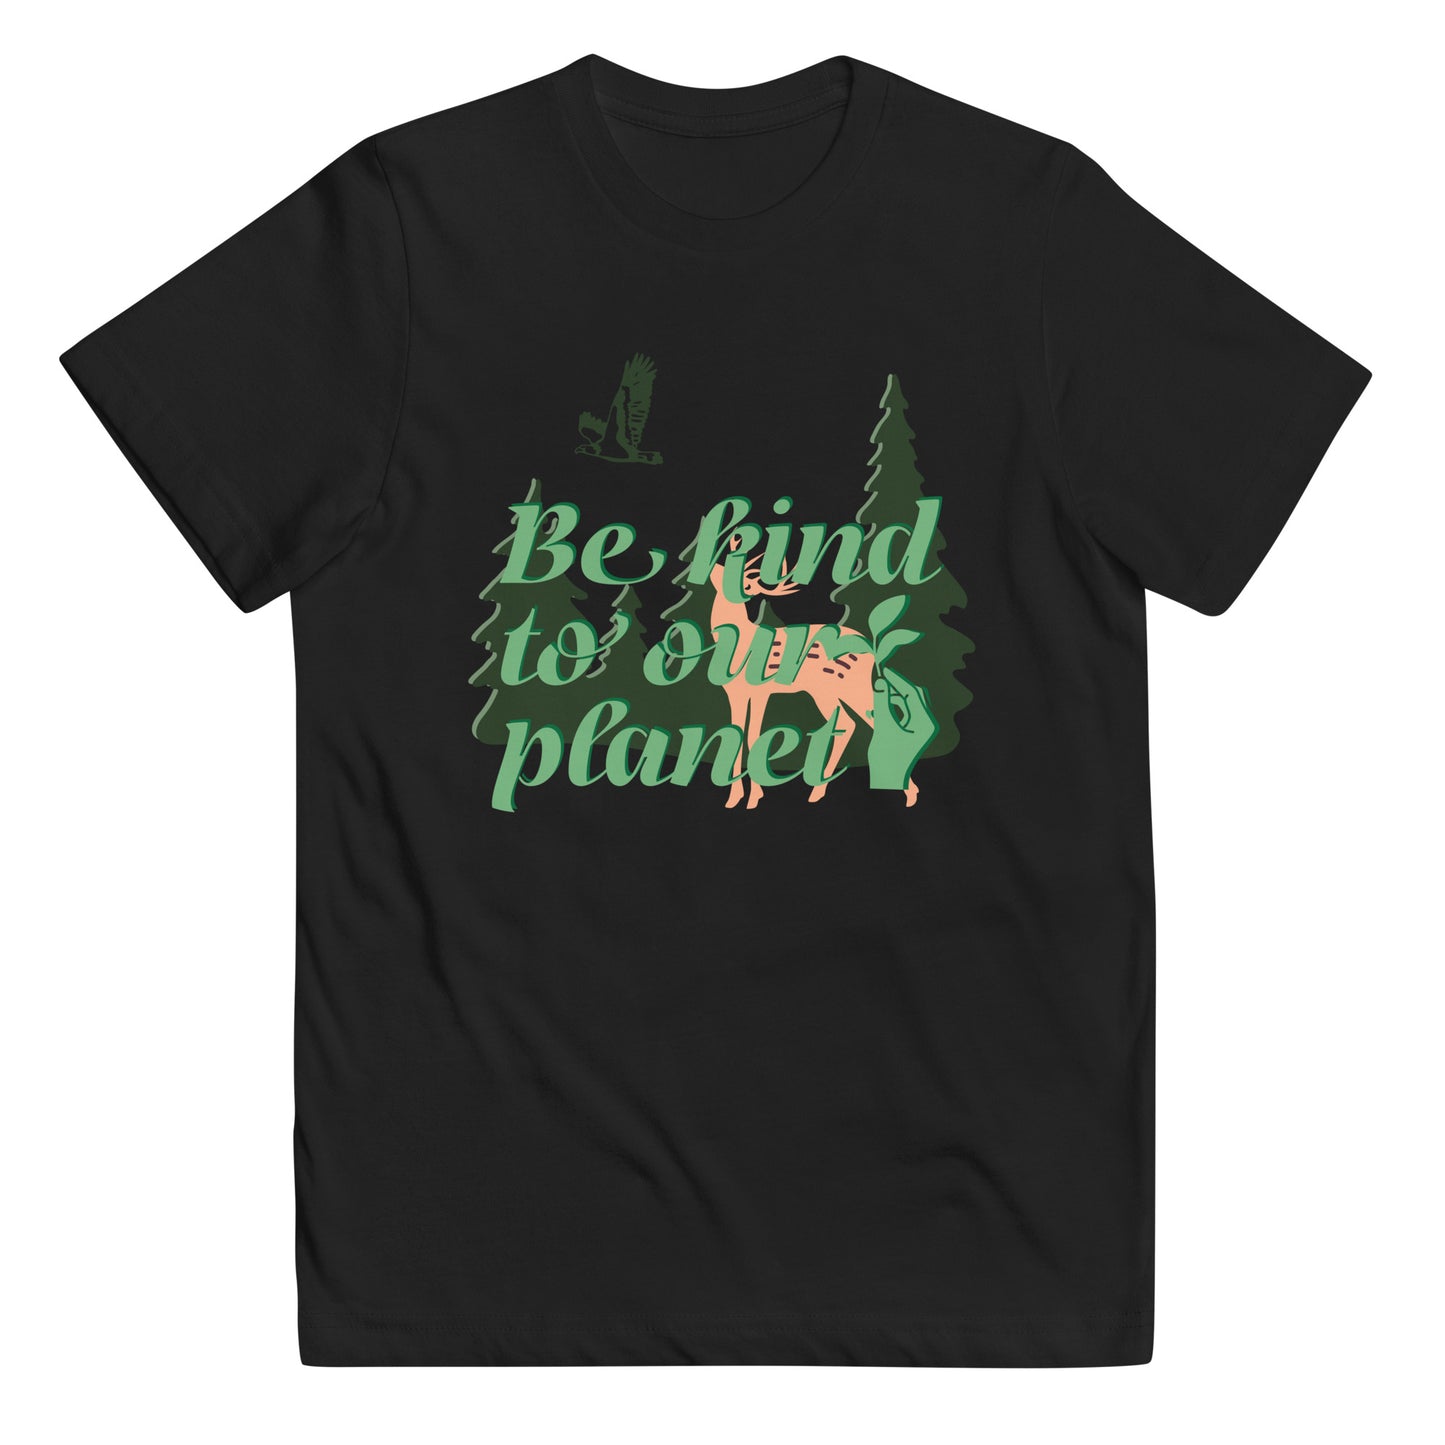 Youth Planet T-Shirt